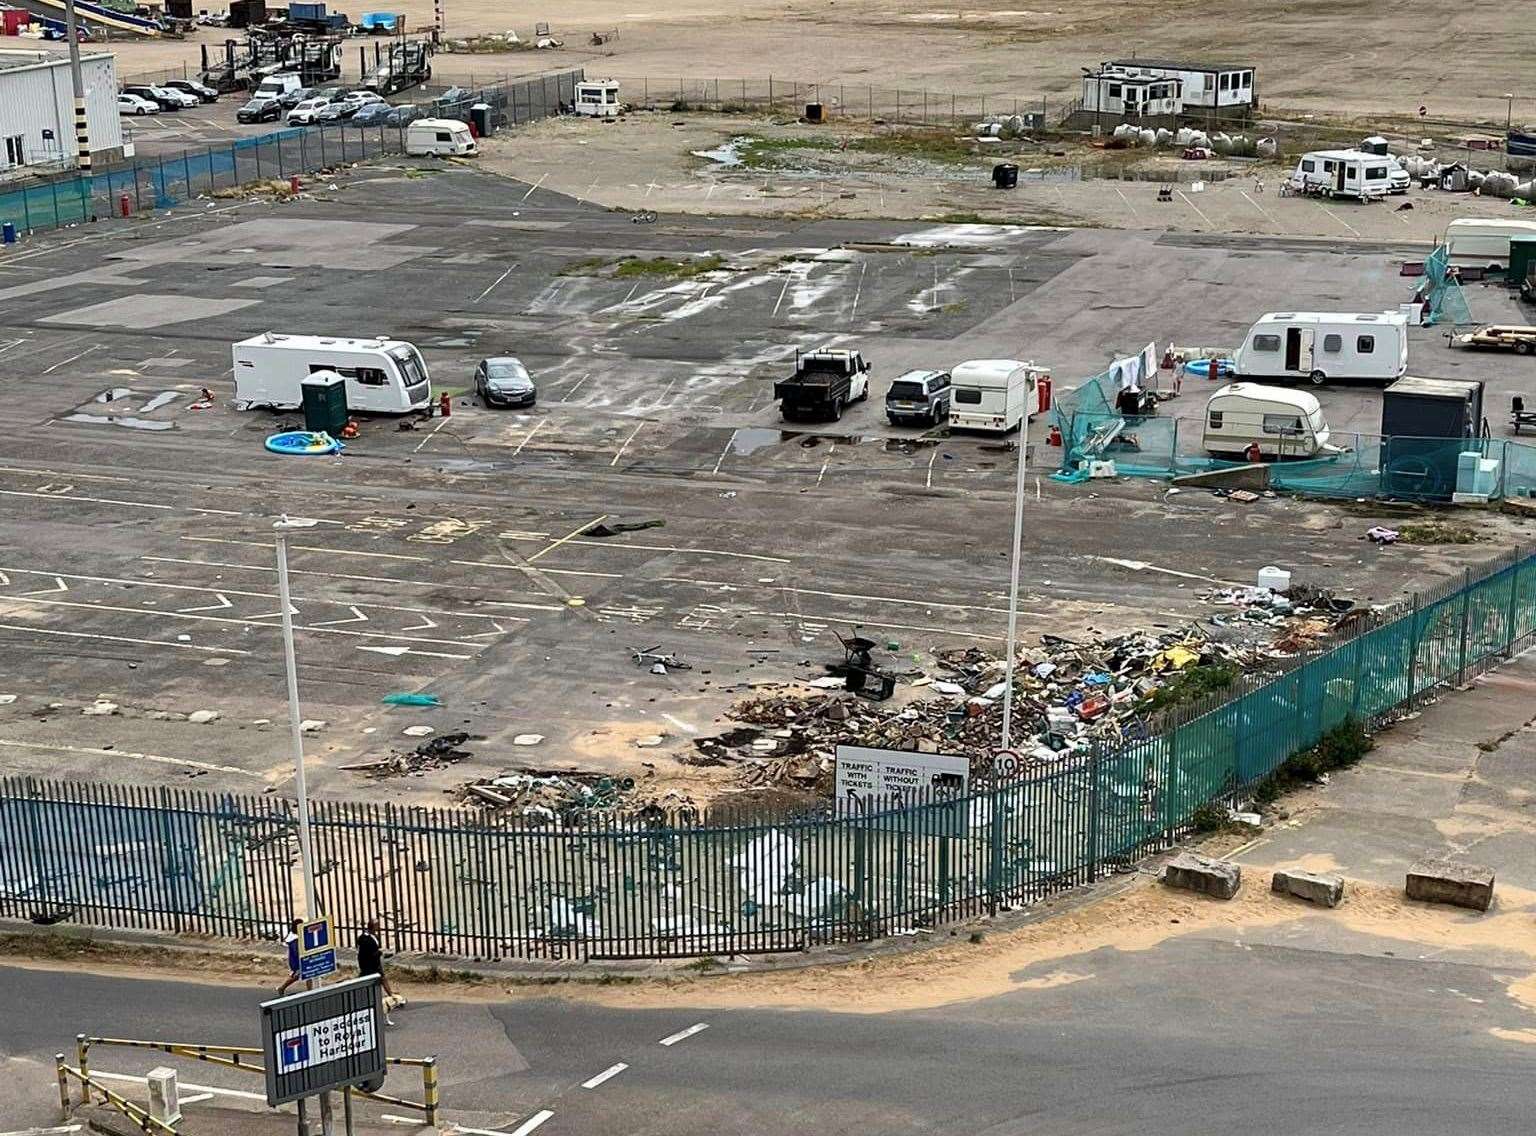 The travellers have lived at Ramsgate port since May 2021